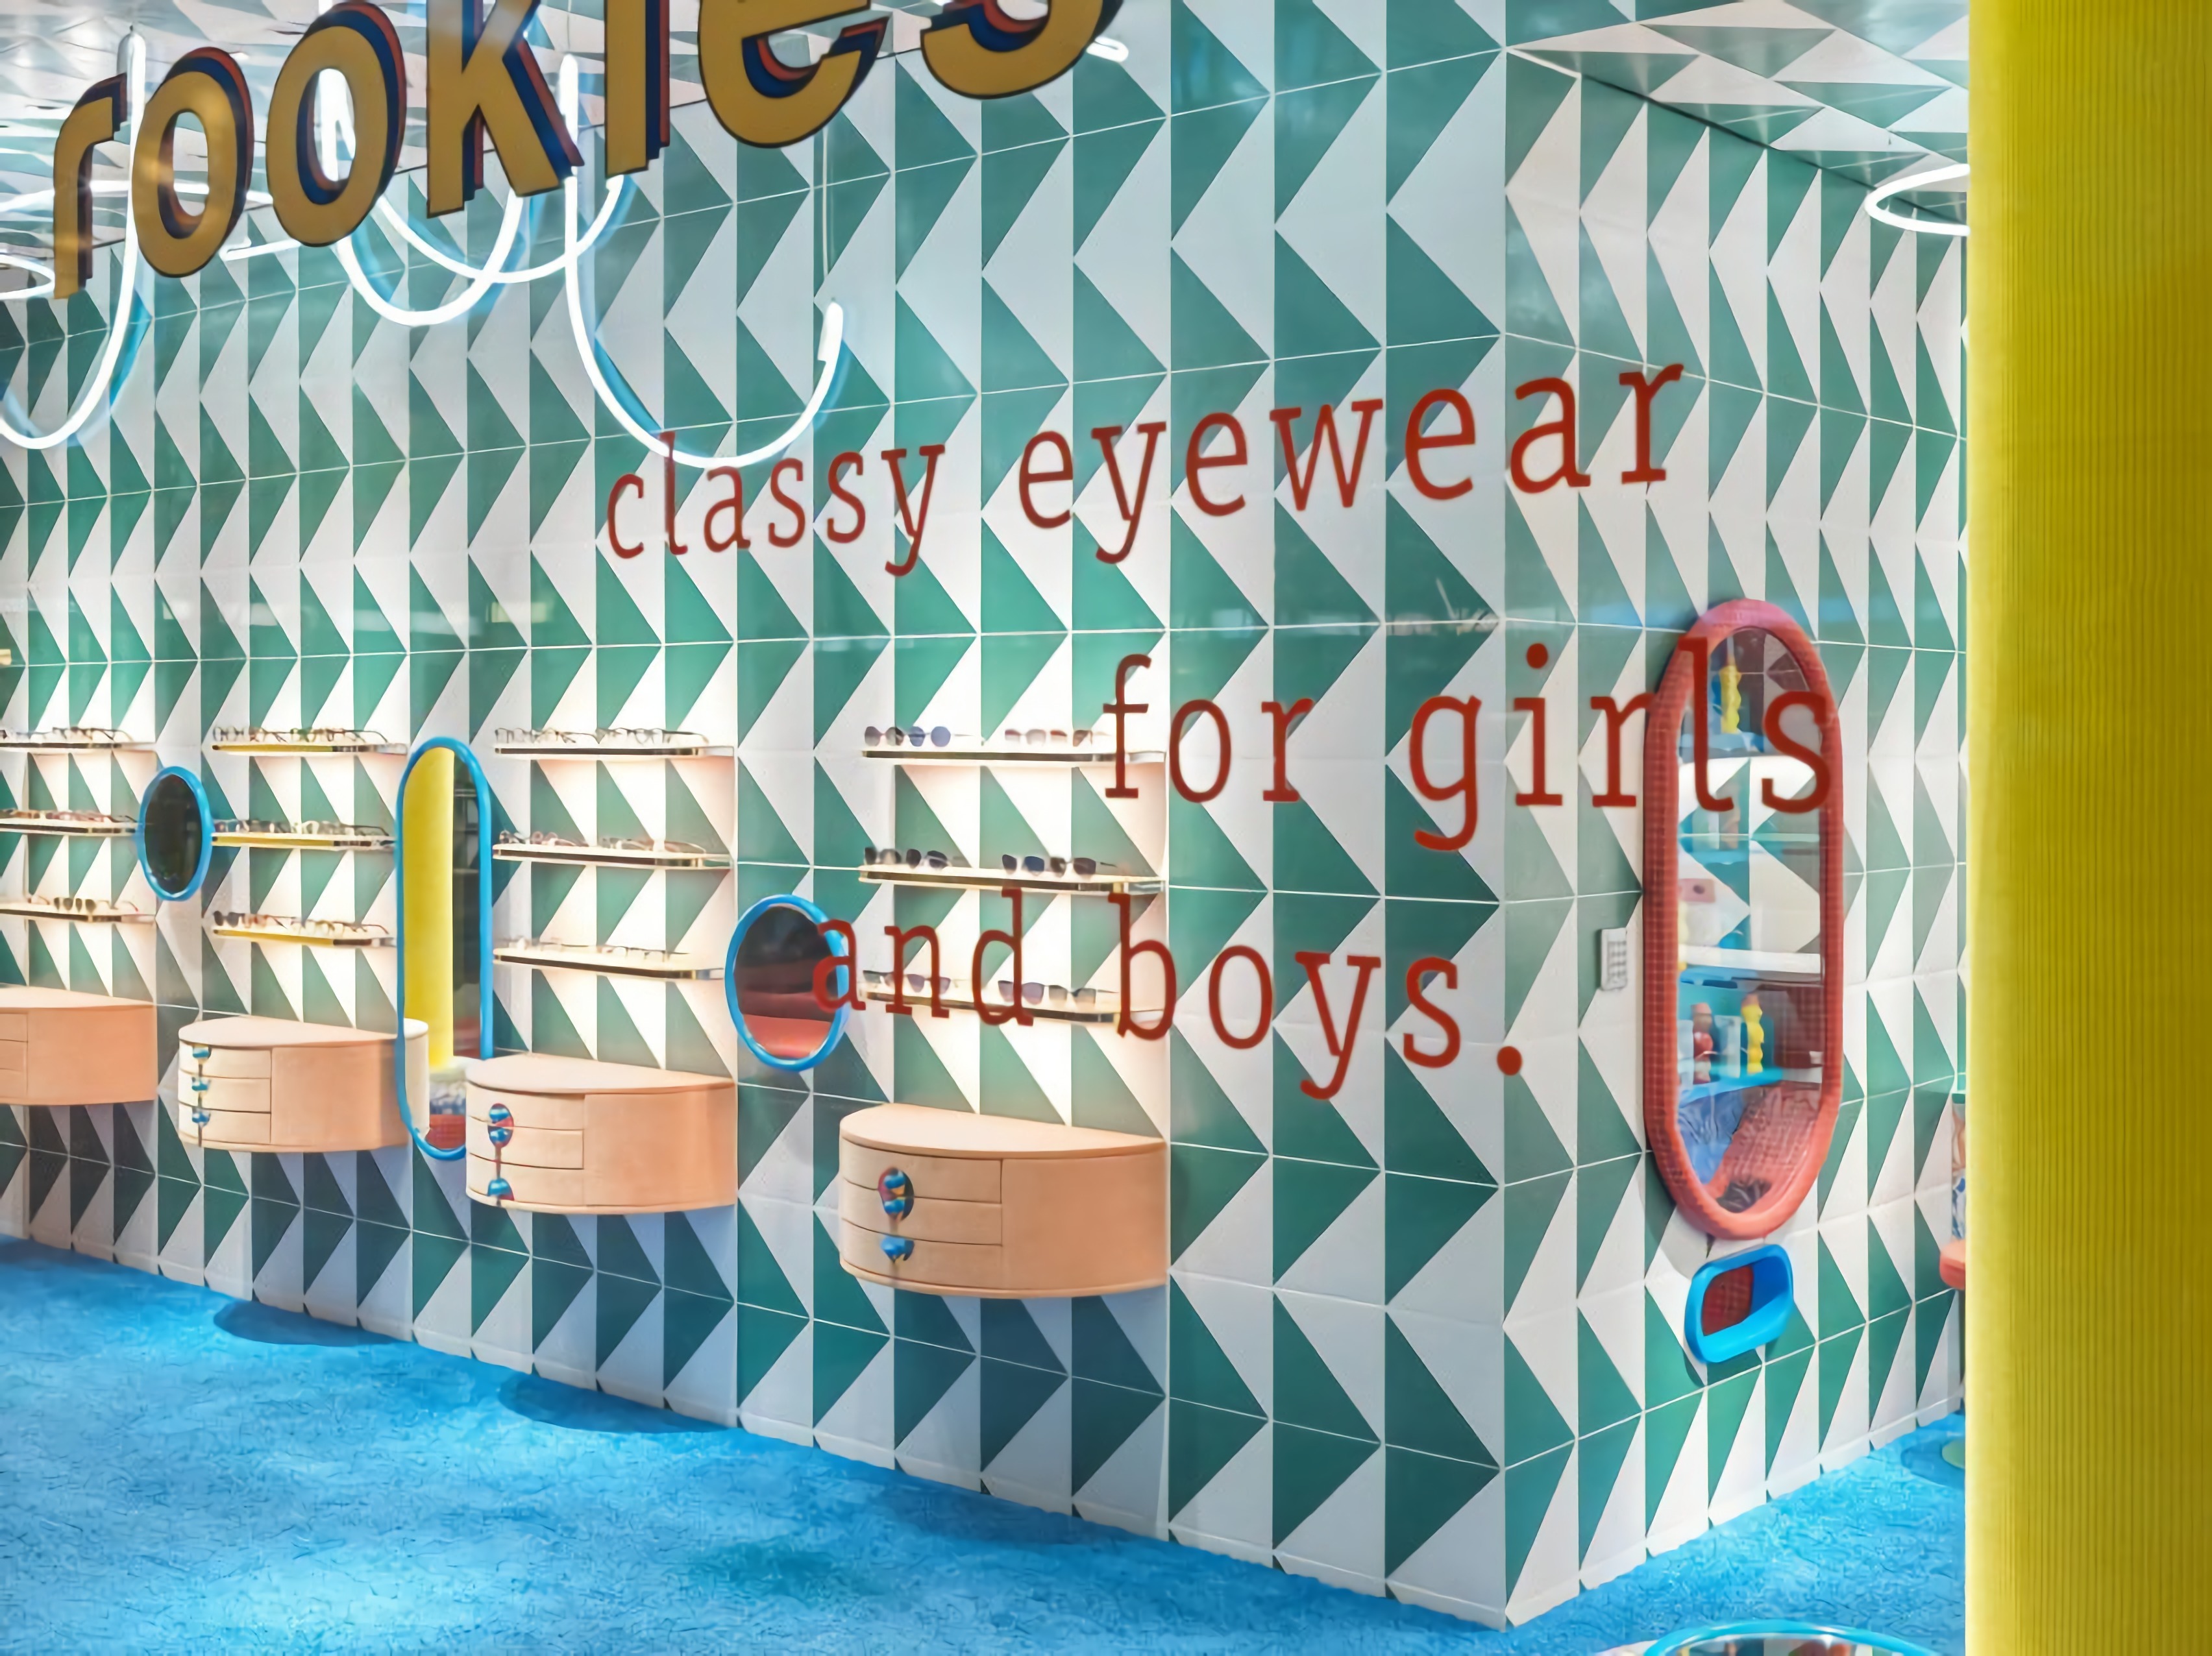 Use of Tiles in the Interior Design of Rookies Eyewear Shop